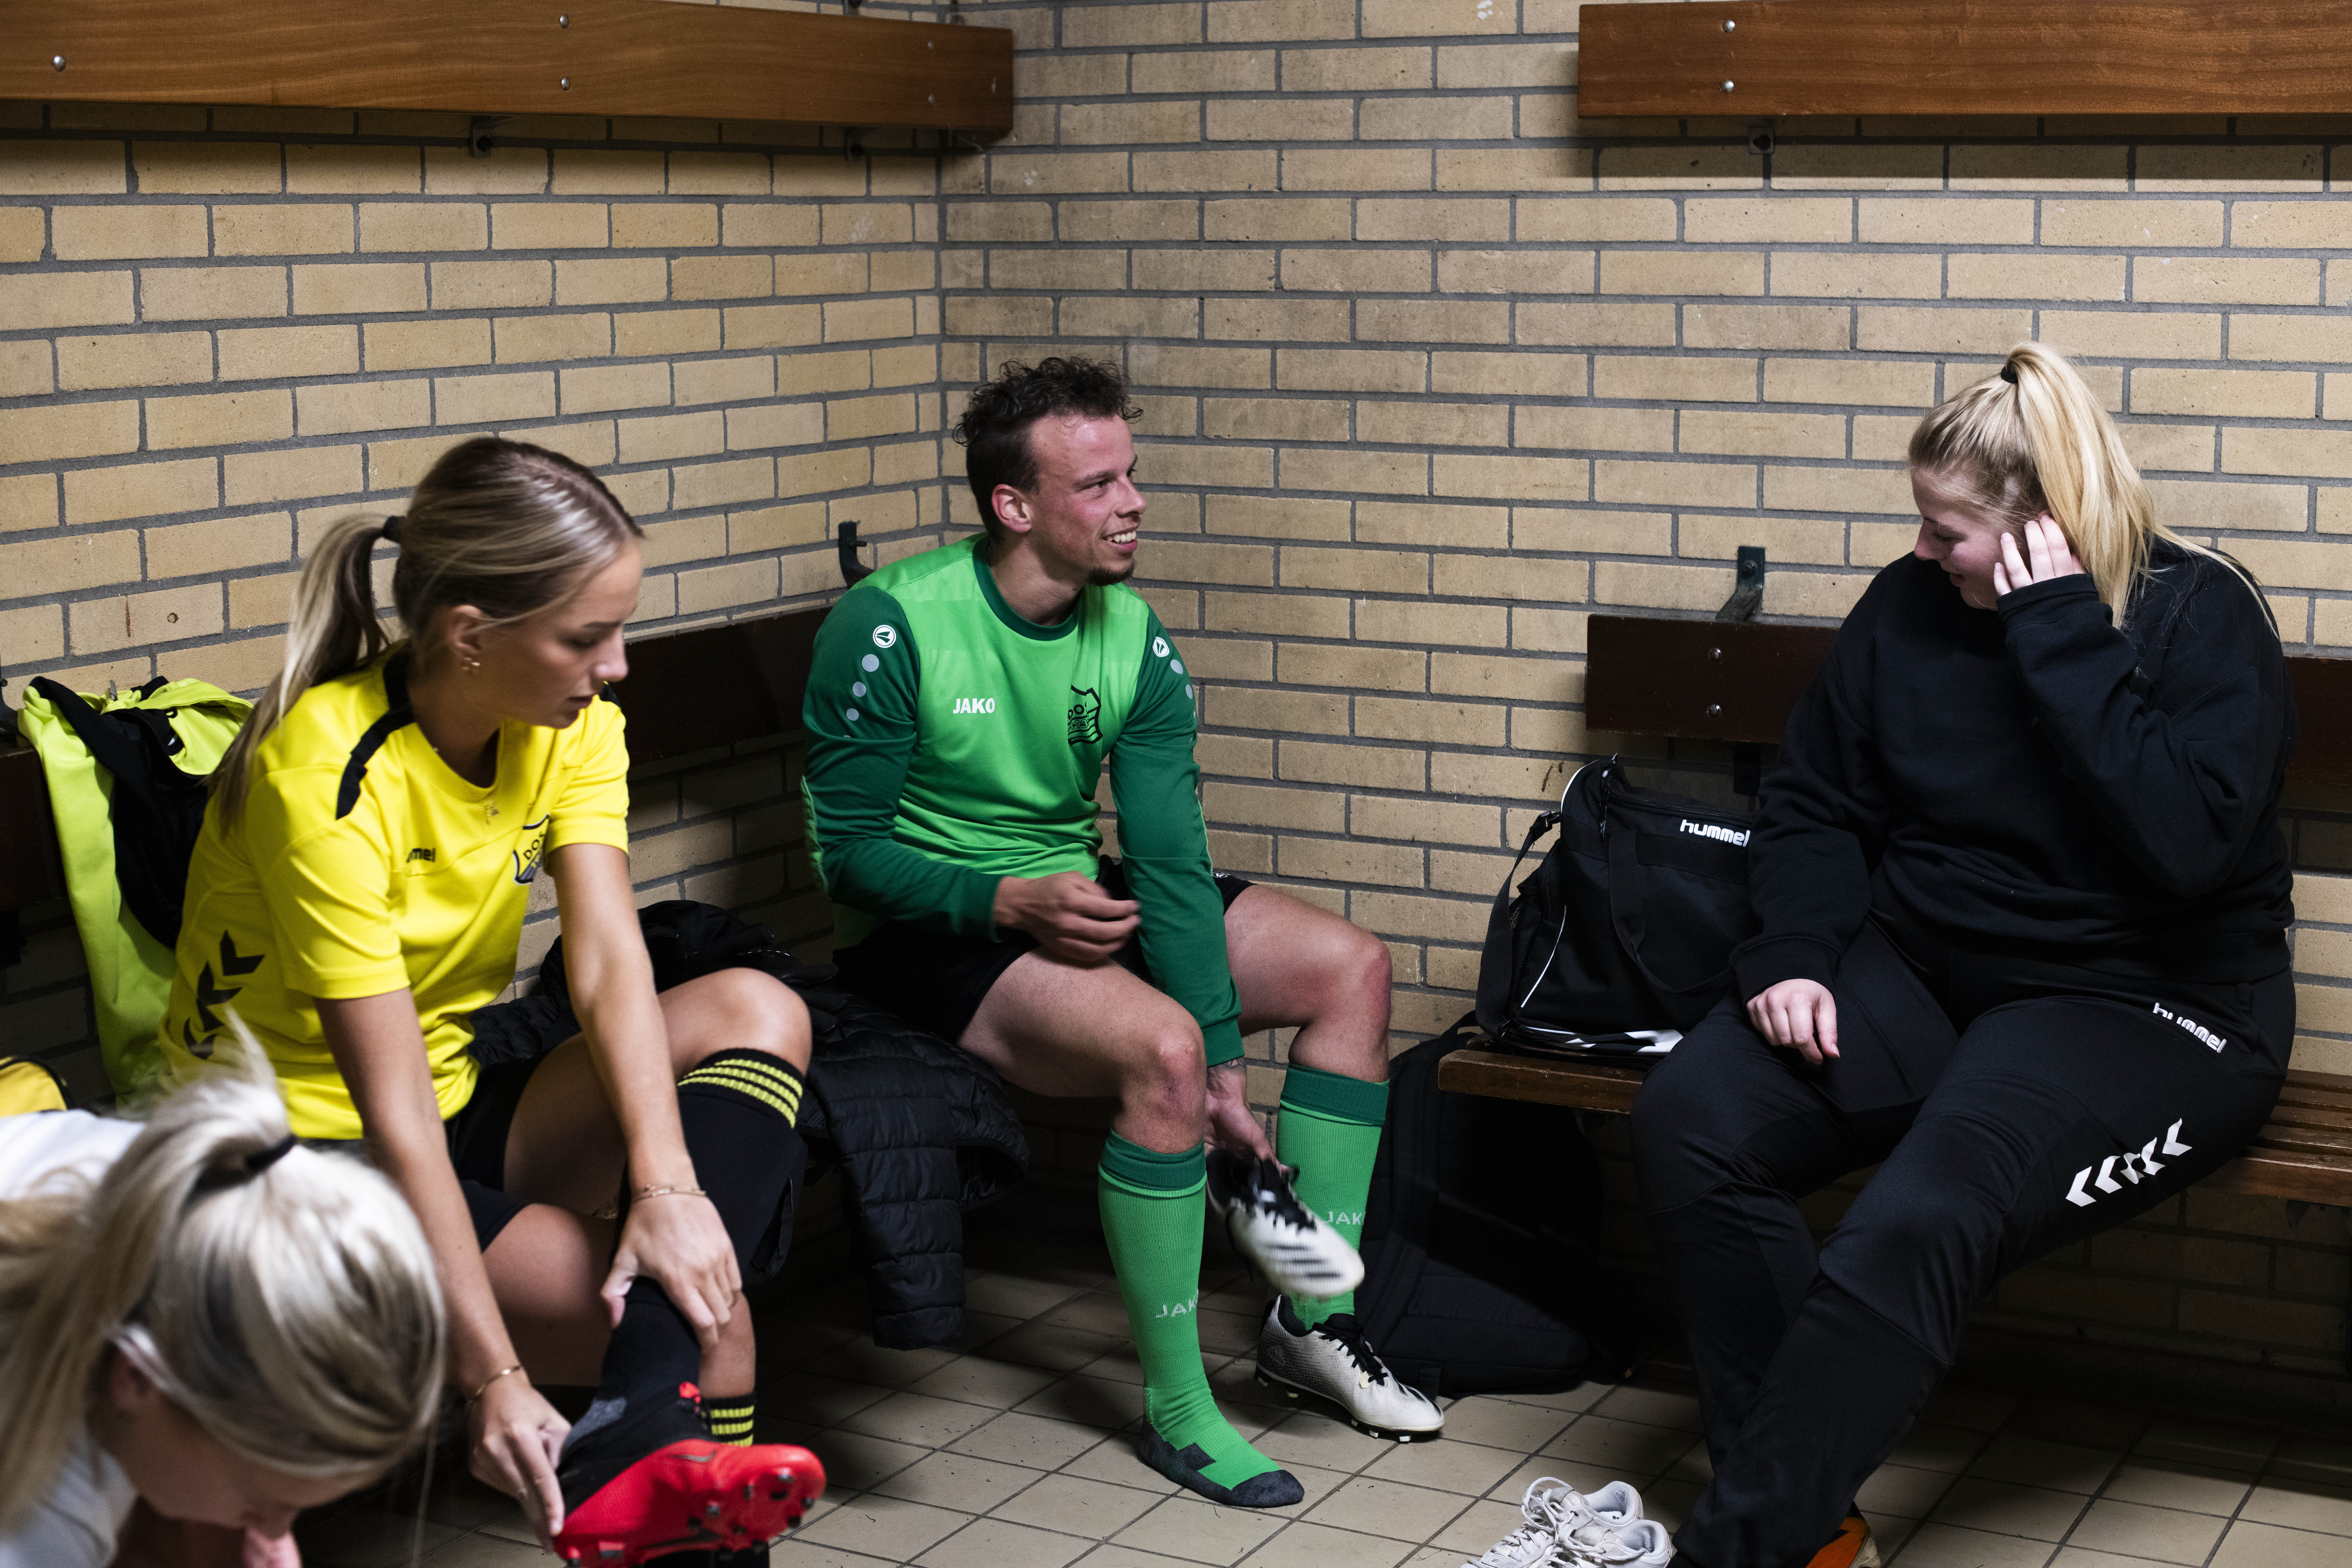 four players putting their sneakers on in a sports locker room. One of them is dressed in black, another in green, one in yellow, and the last one if white